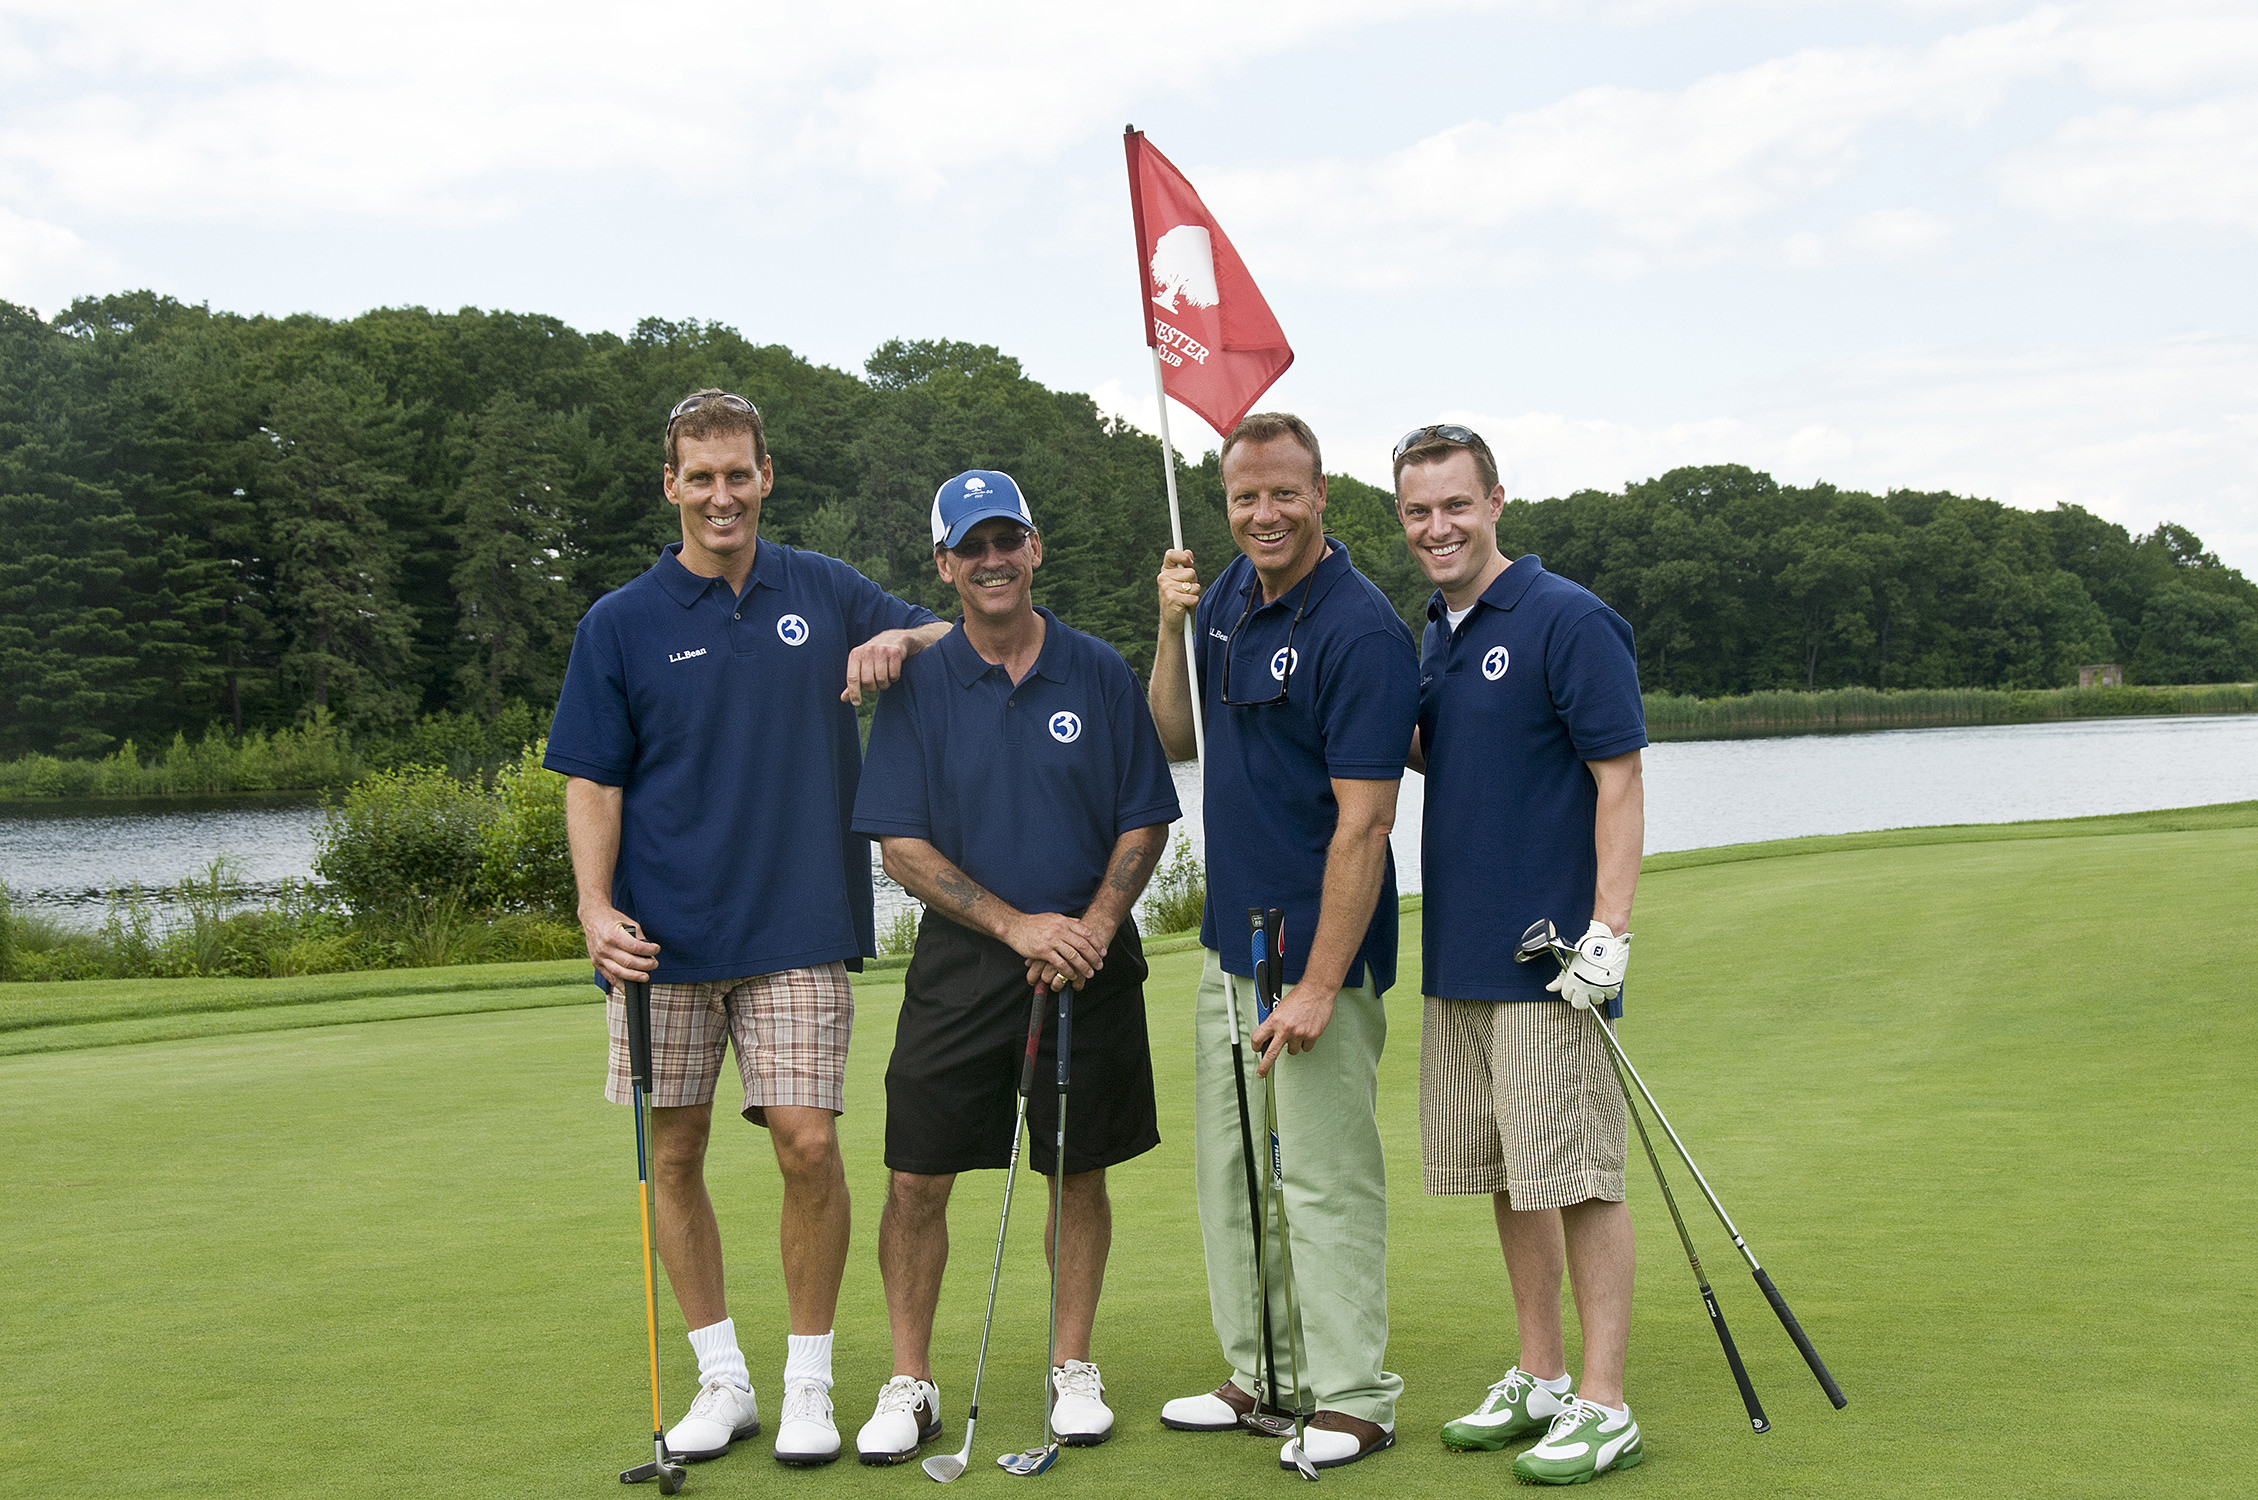 Scot Haney, Mr. Devine lead a foursome at the 2014 CRIS Golf Classic at Manchester Country Club.